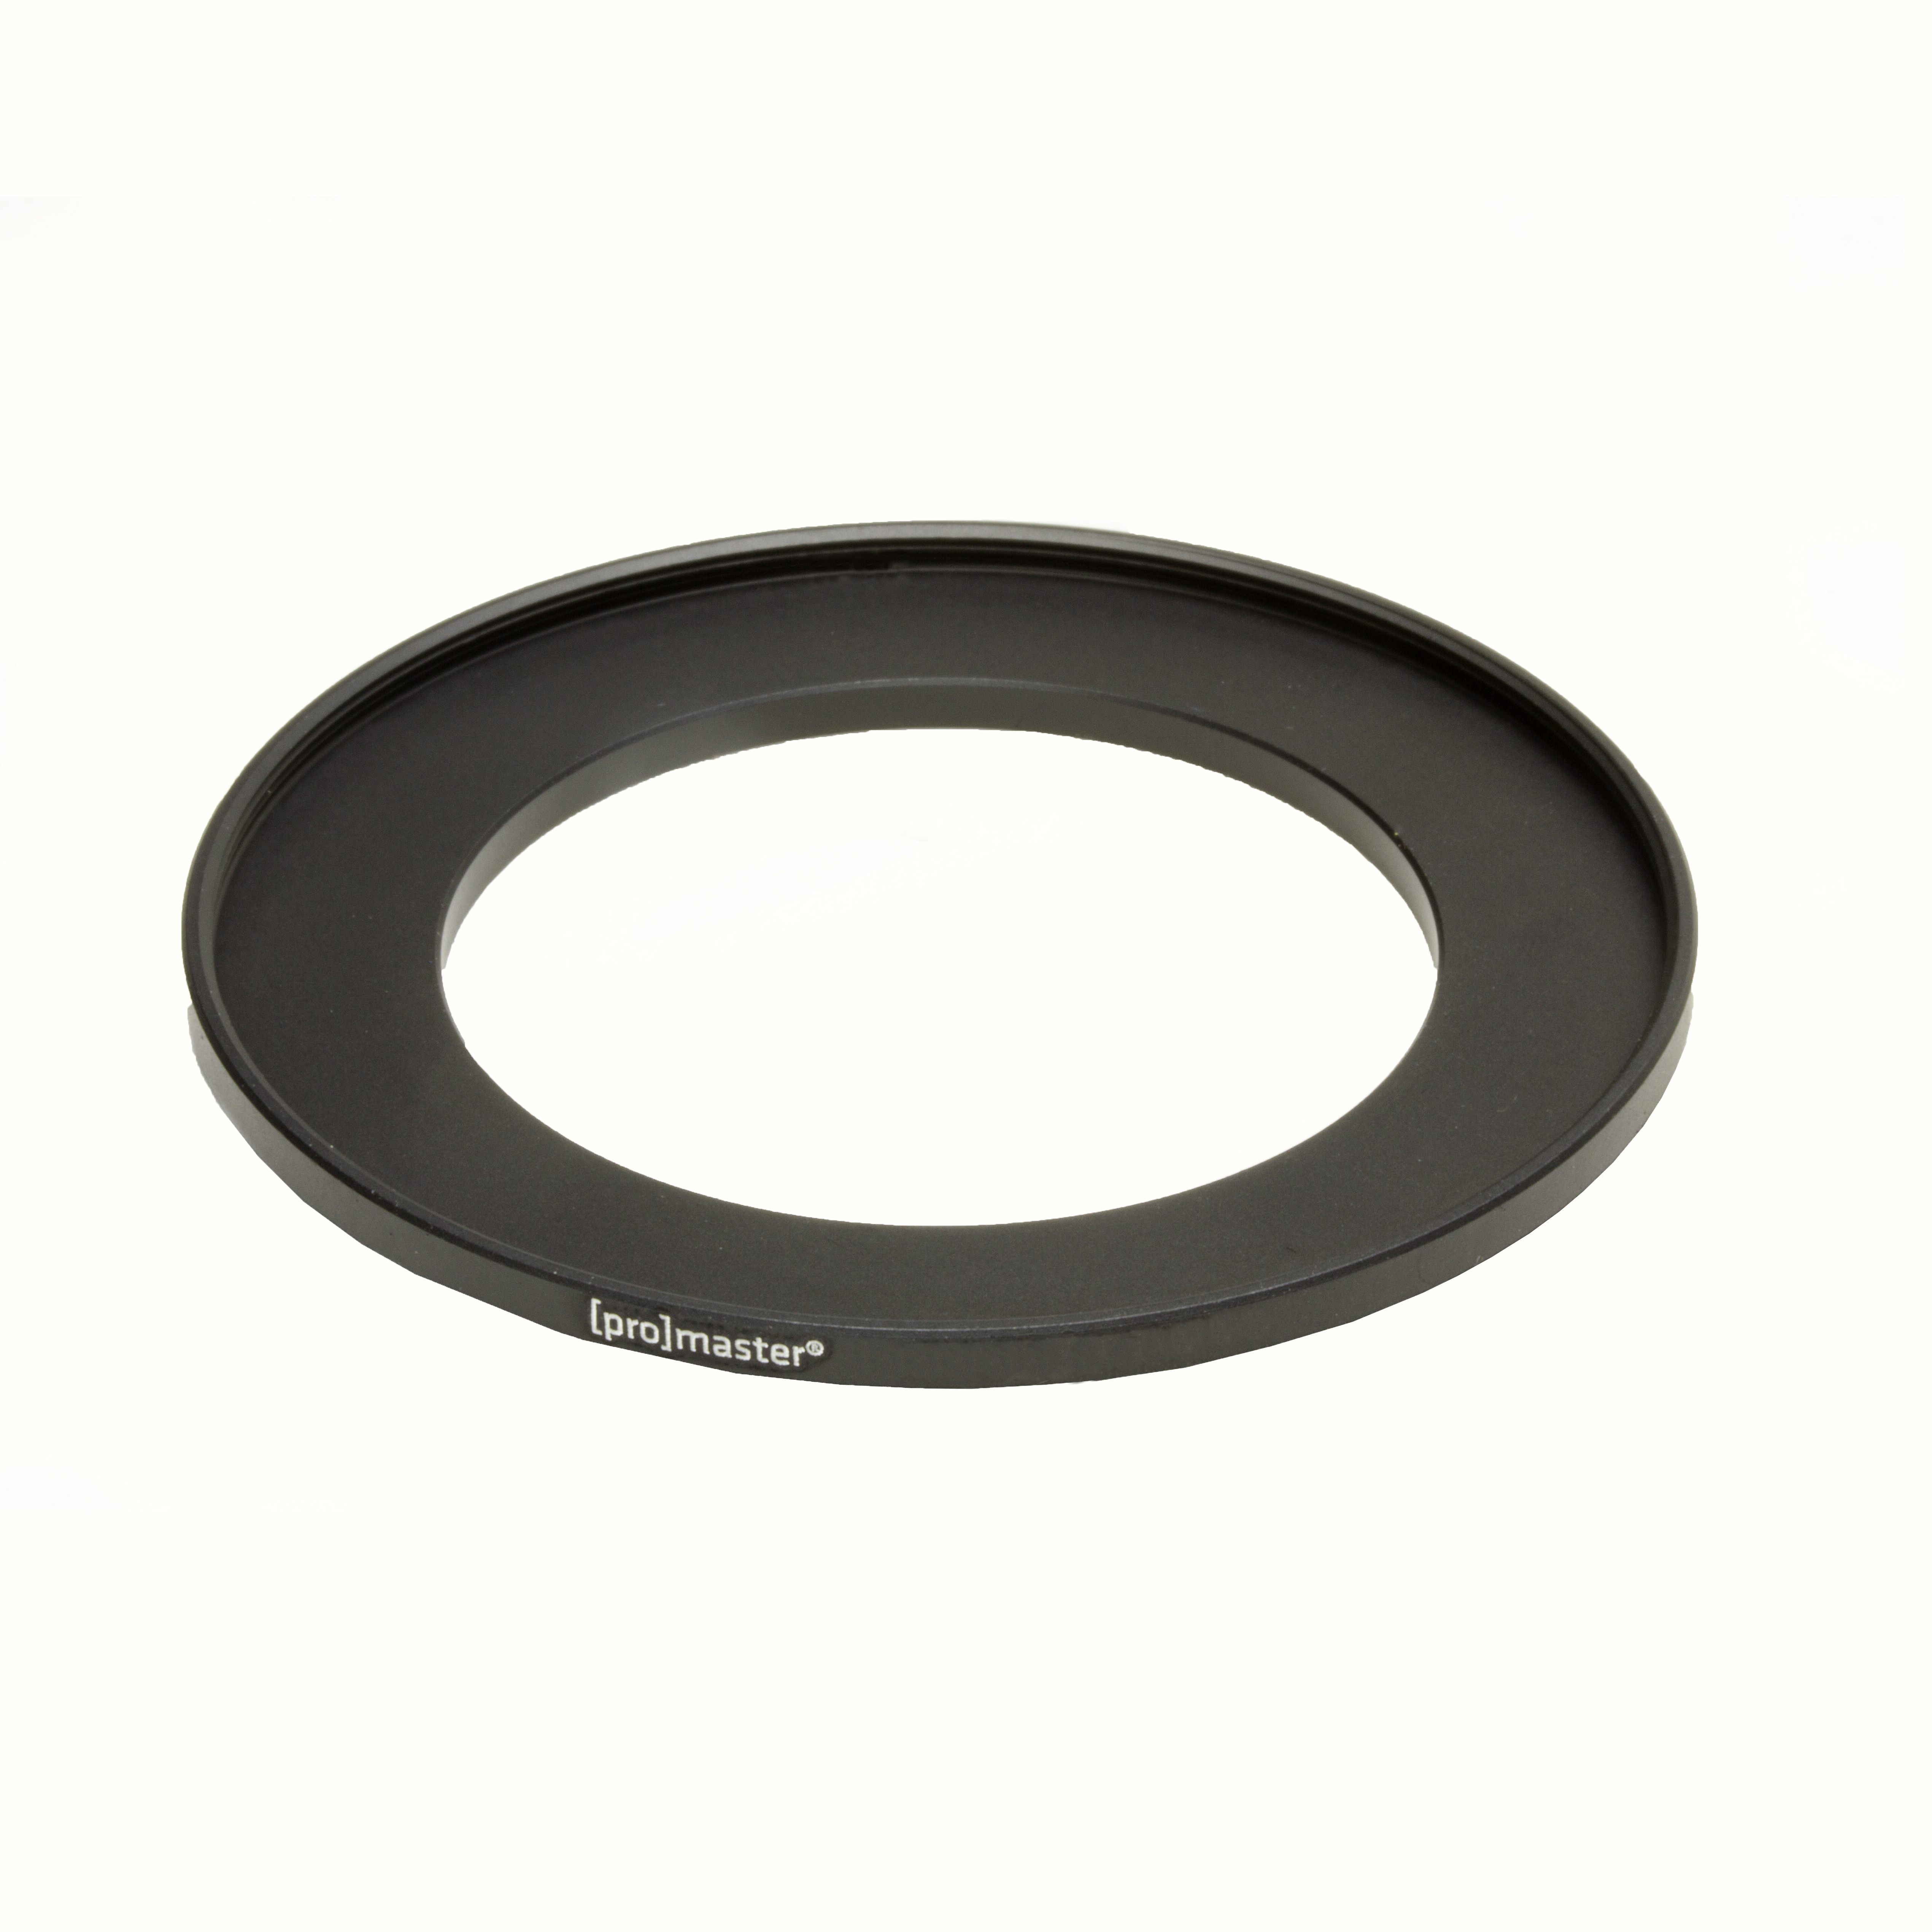 Promaster 5103 67-72mm Step-Up Ring